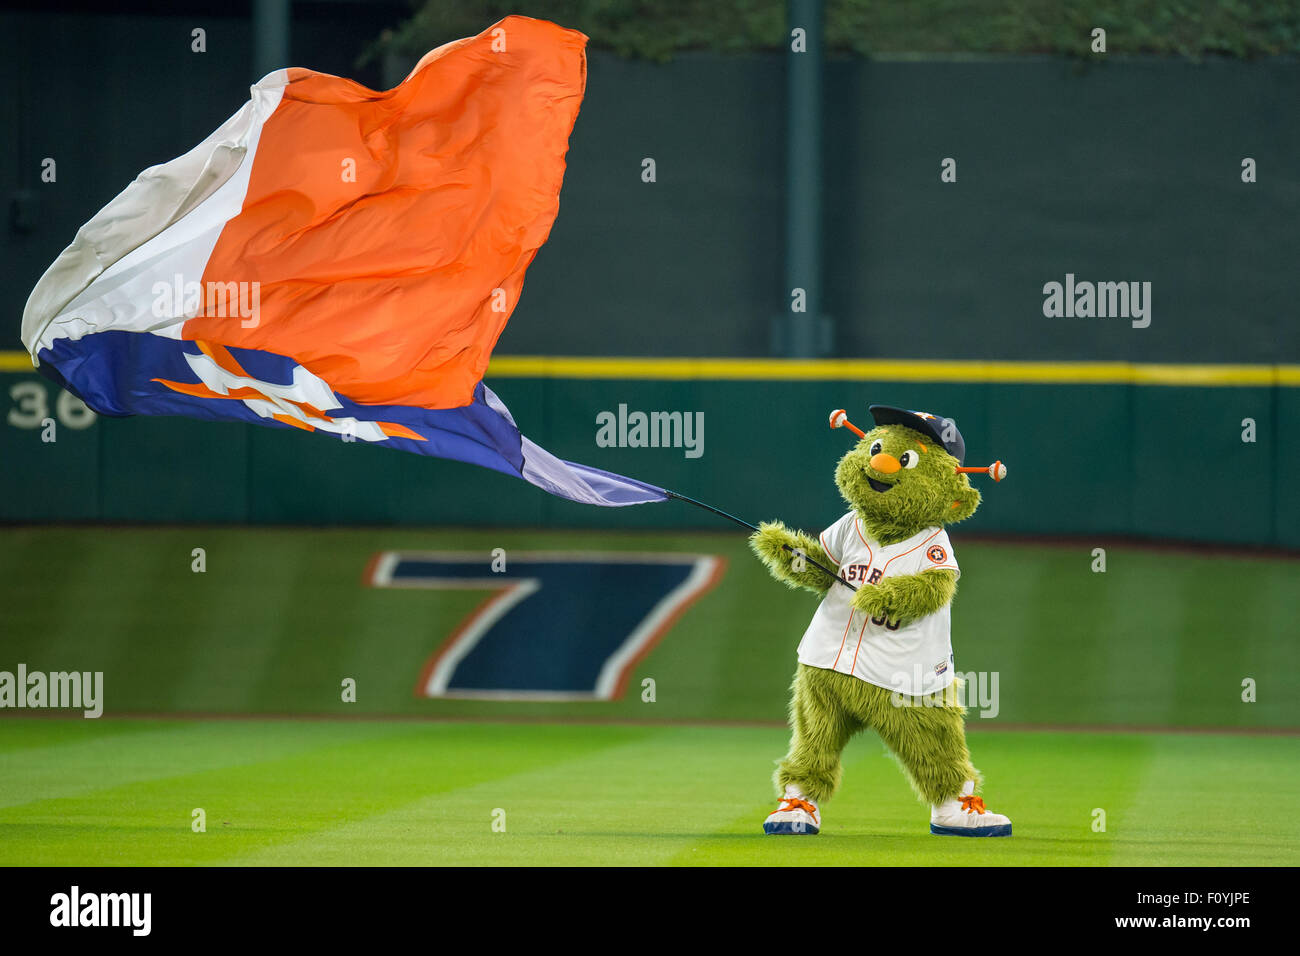 August 23, 2015: Houston Astros mascot orbit waves the victory